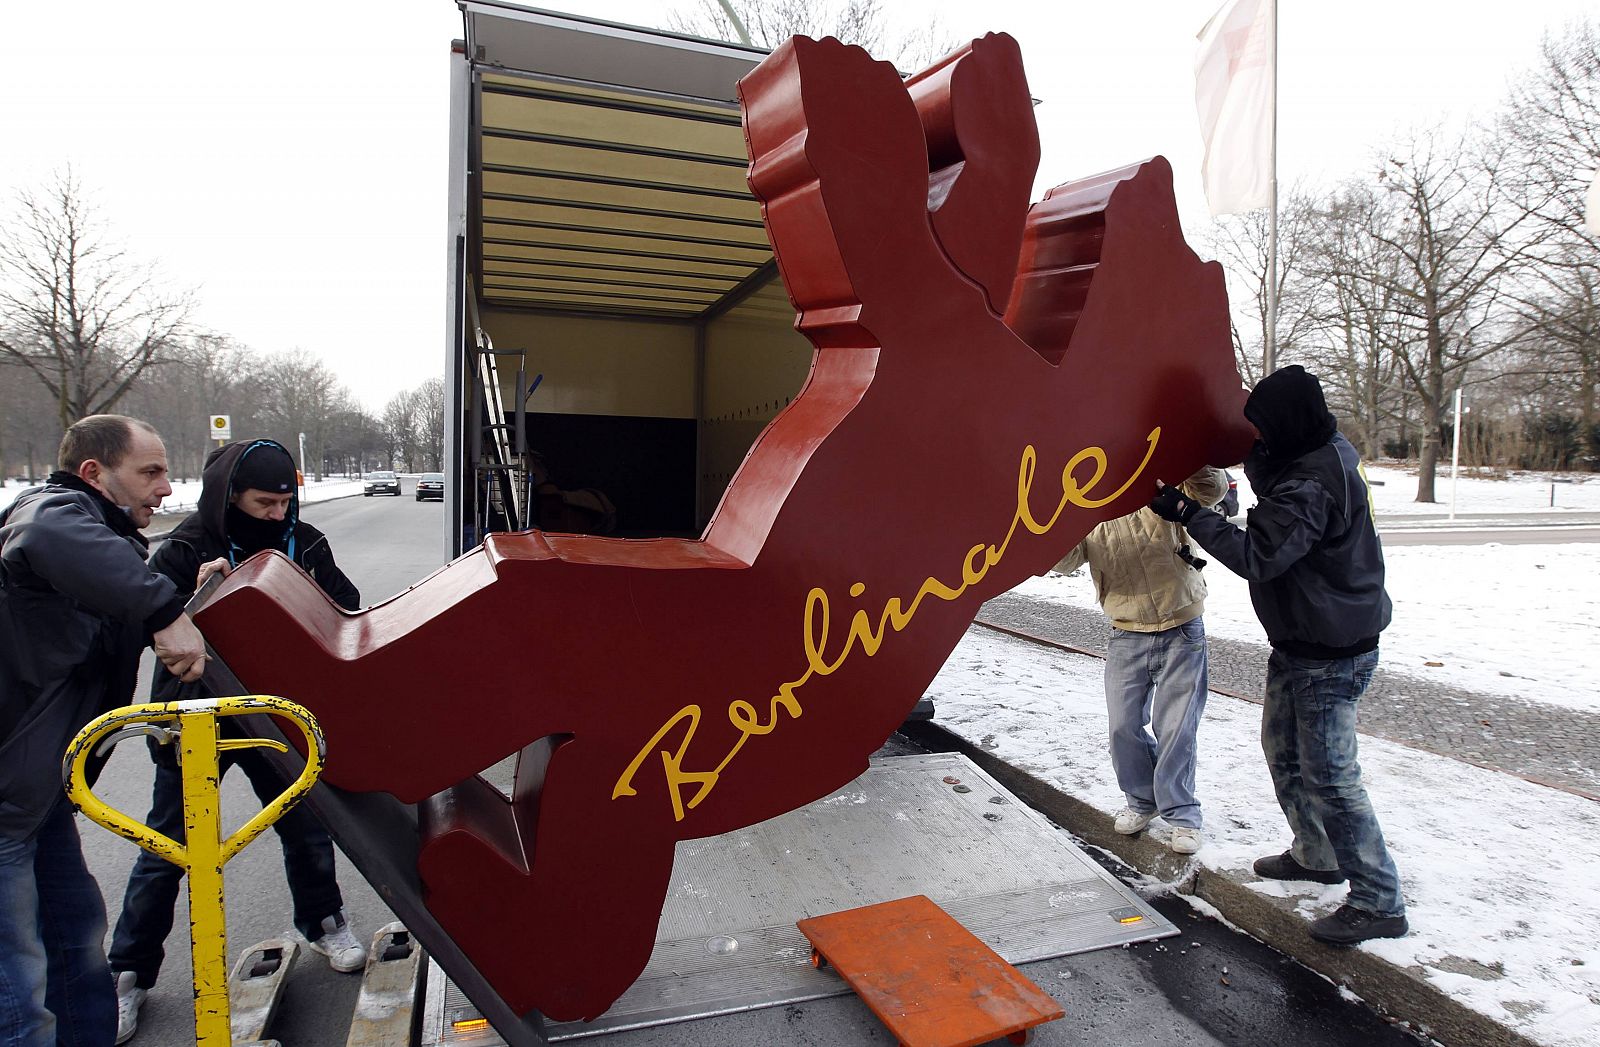 Workers unload the Berlinale International Film Festival logo near the congress hall for the upcoming 62nd Berlinale International Film Festival in Berlin